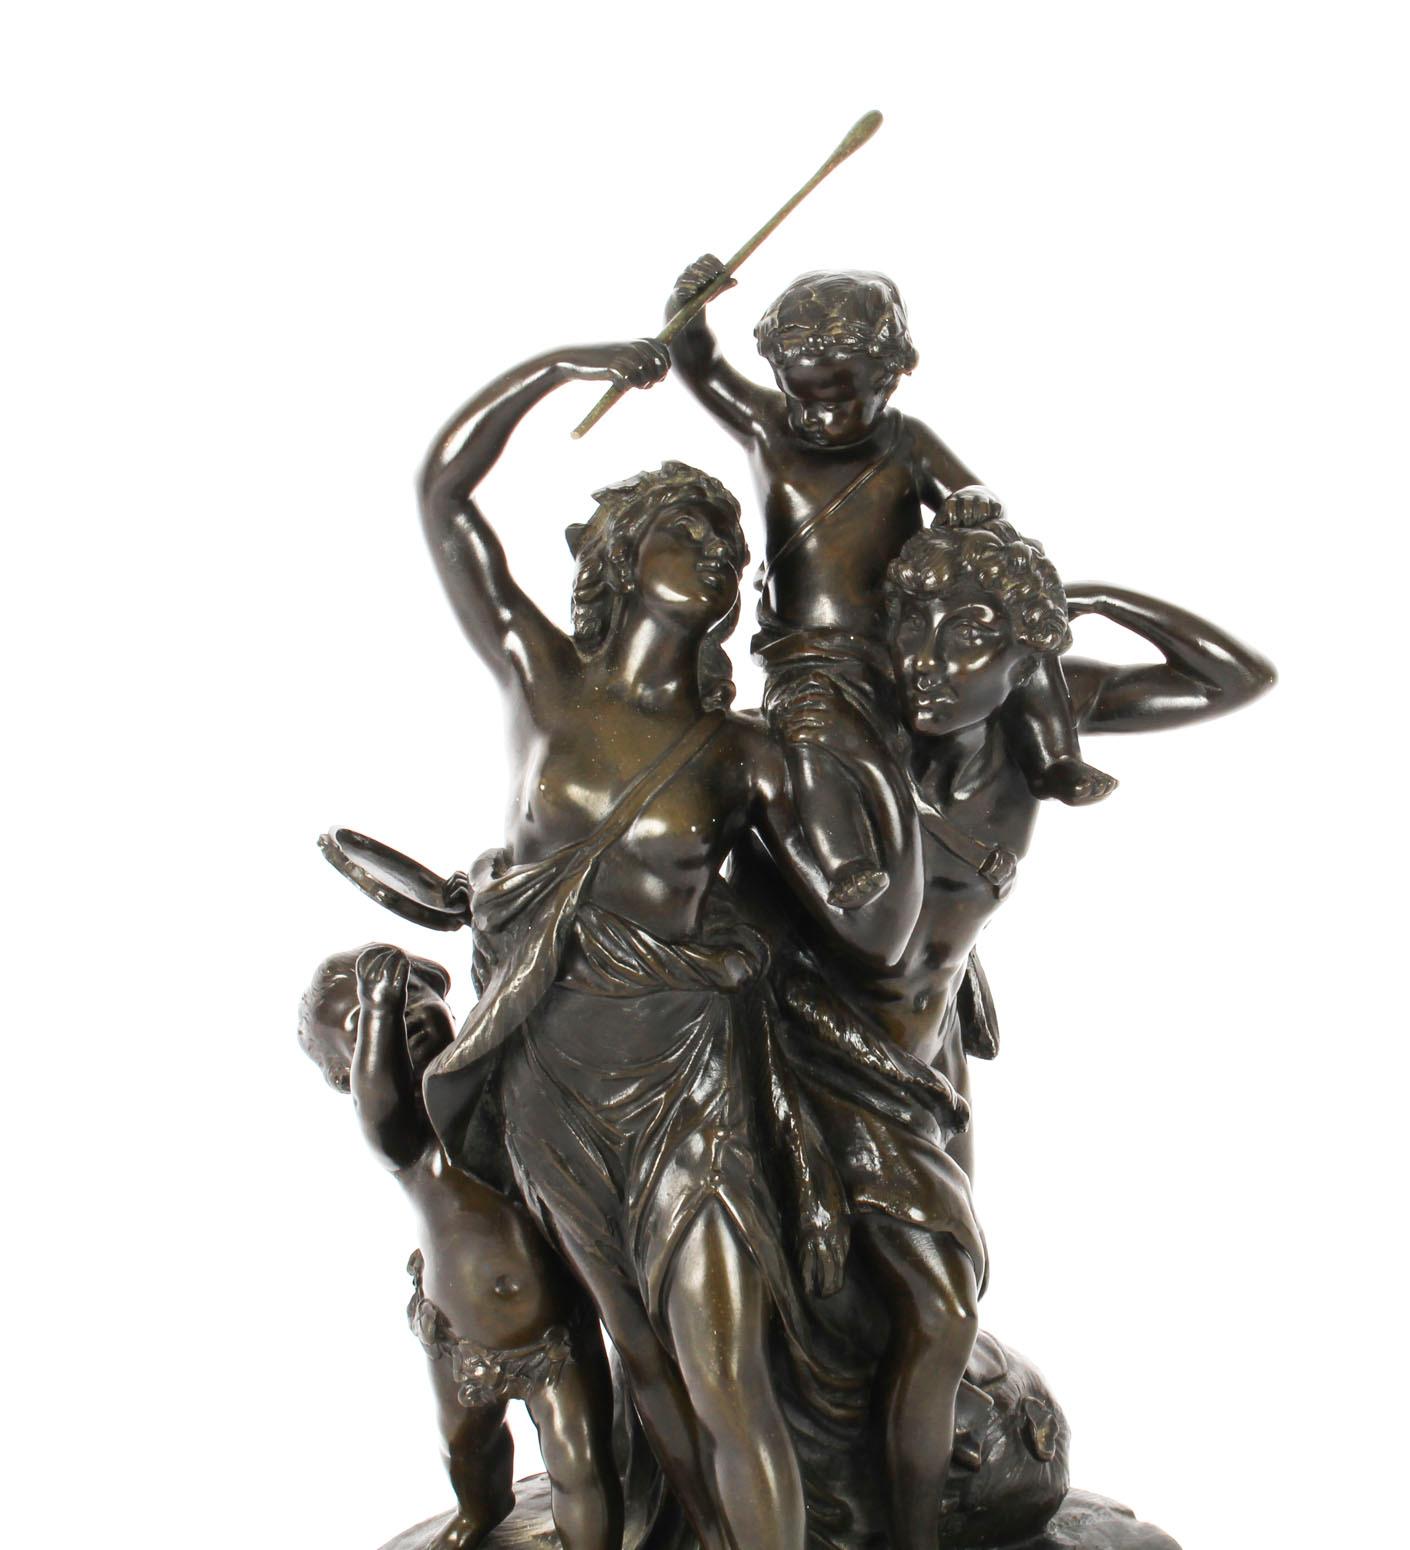 A finely cast striking patinated bronze sculpture of The Triumph of Bacchus, signed Clodion to the base, circa 1840 in date.
 
The sculptural figural group is in the form of Bacchus, a semi-naked maiden with a pair of cherubs one holding a